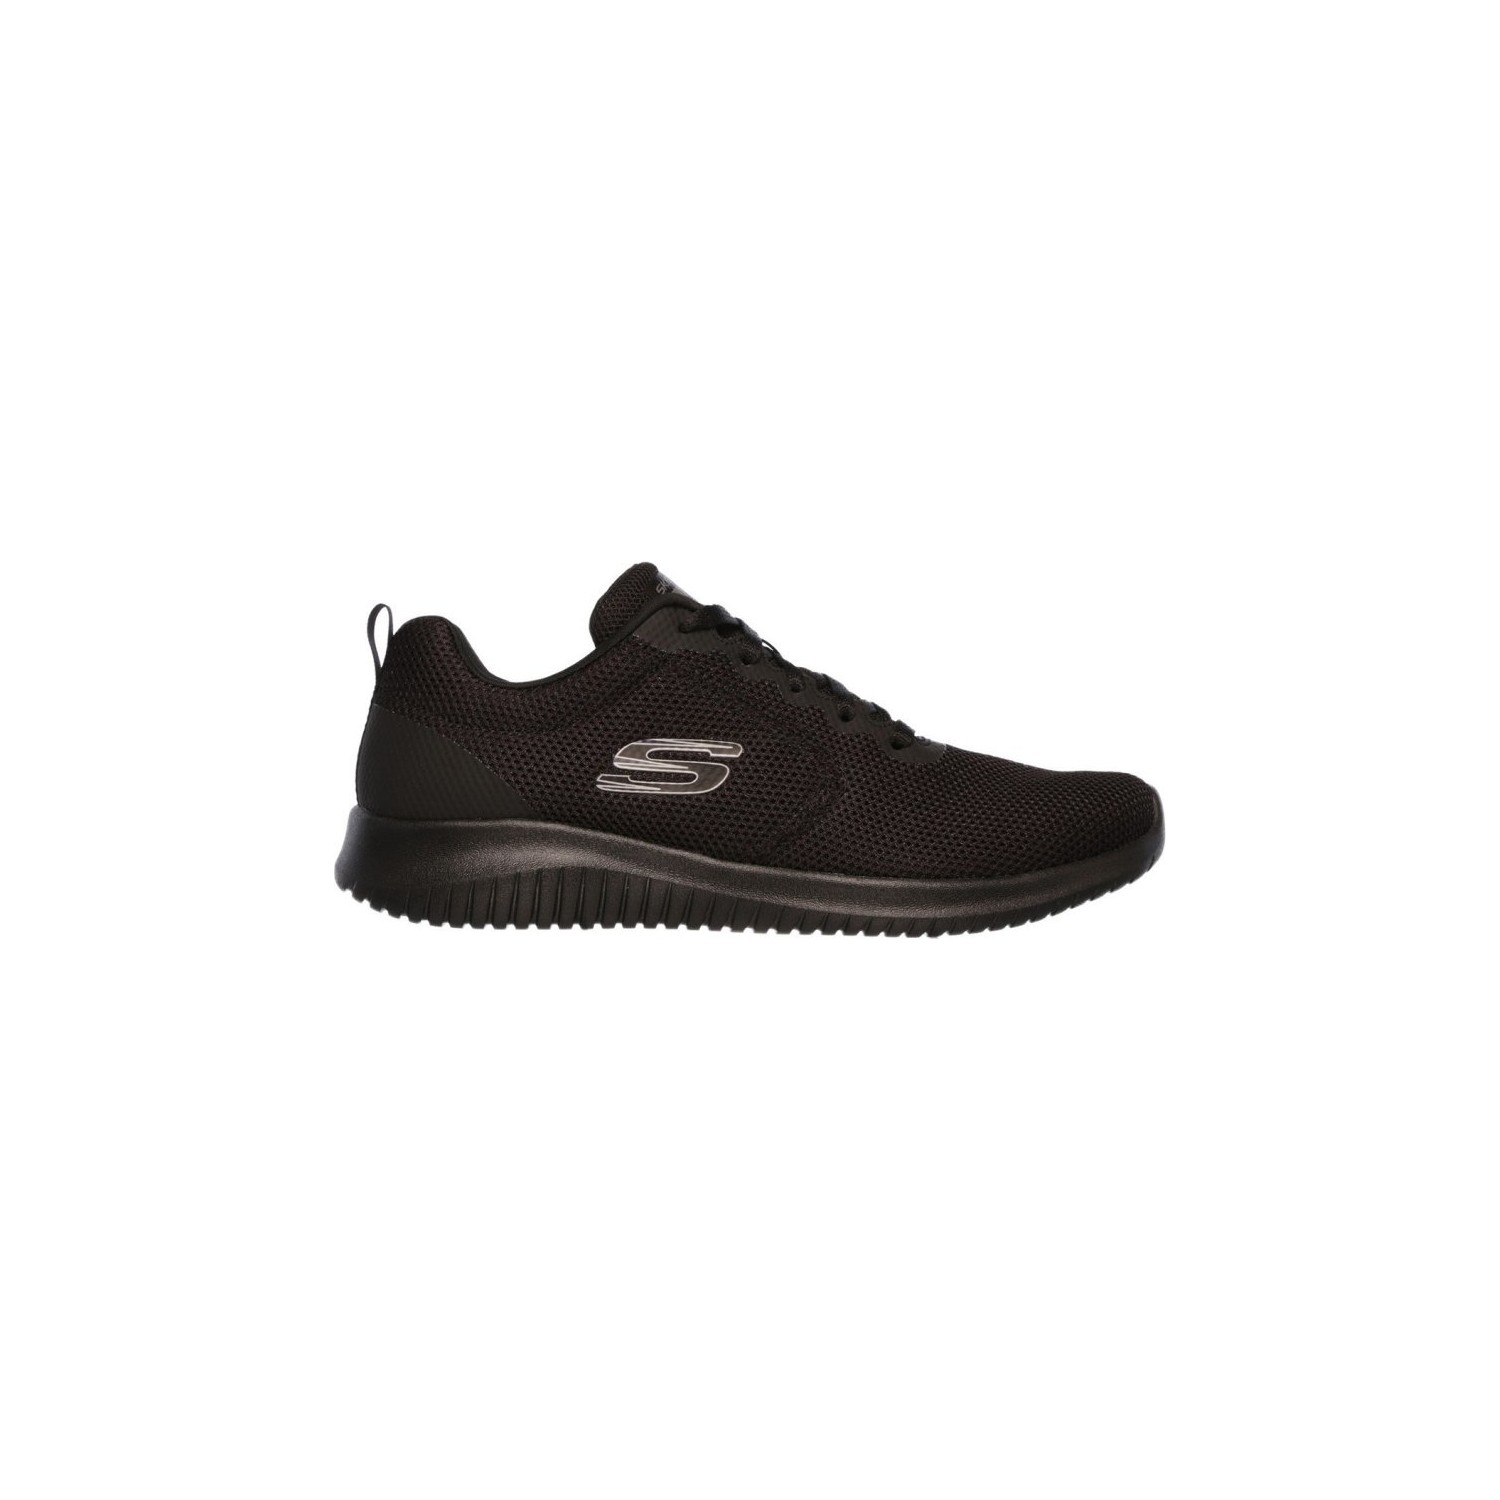 skechers sn 12846 Sale,up to 60% Discounts